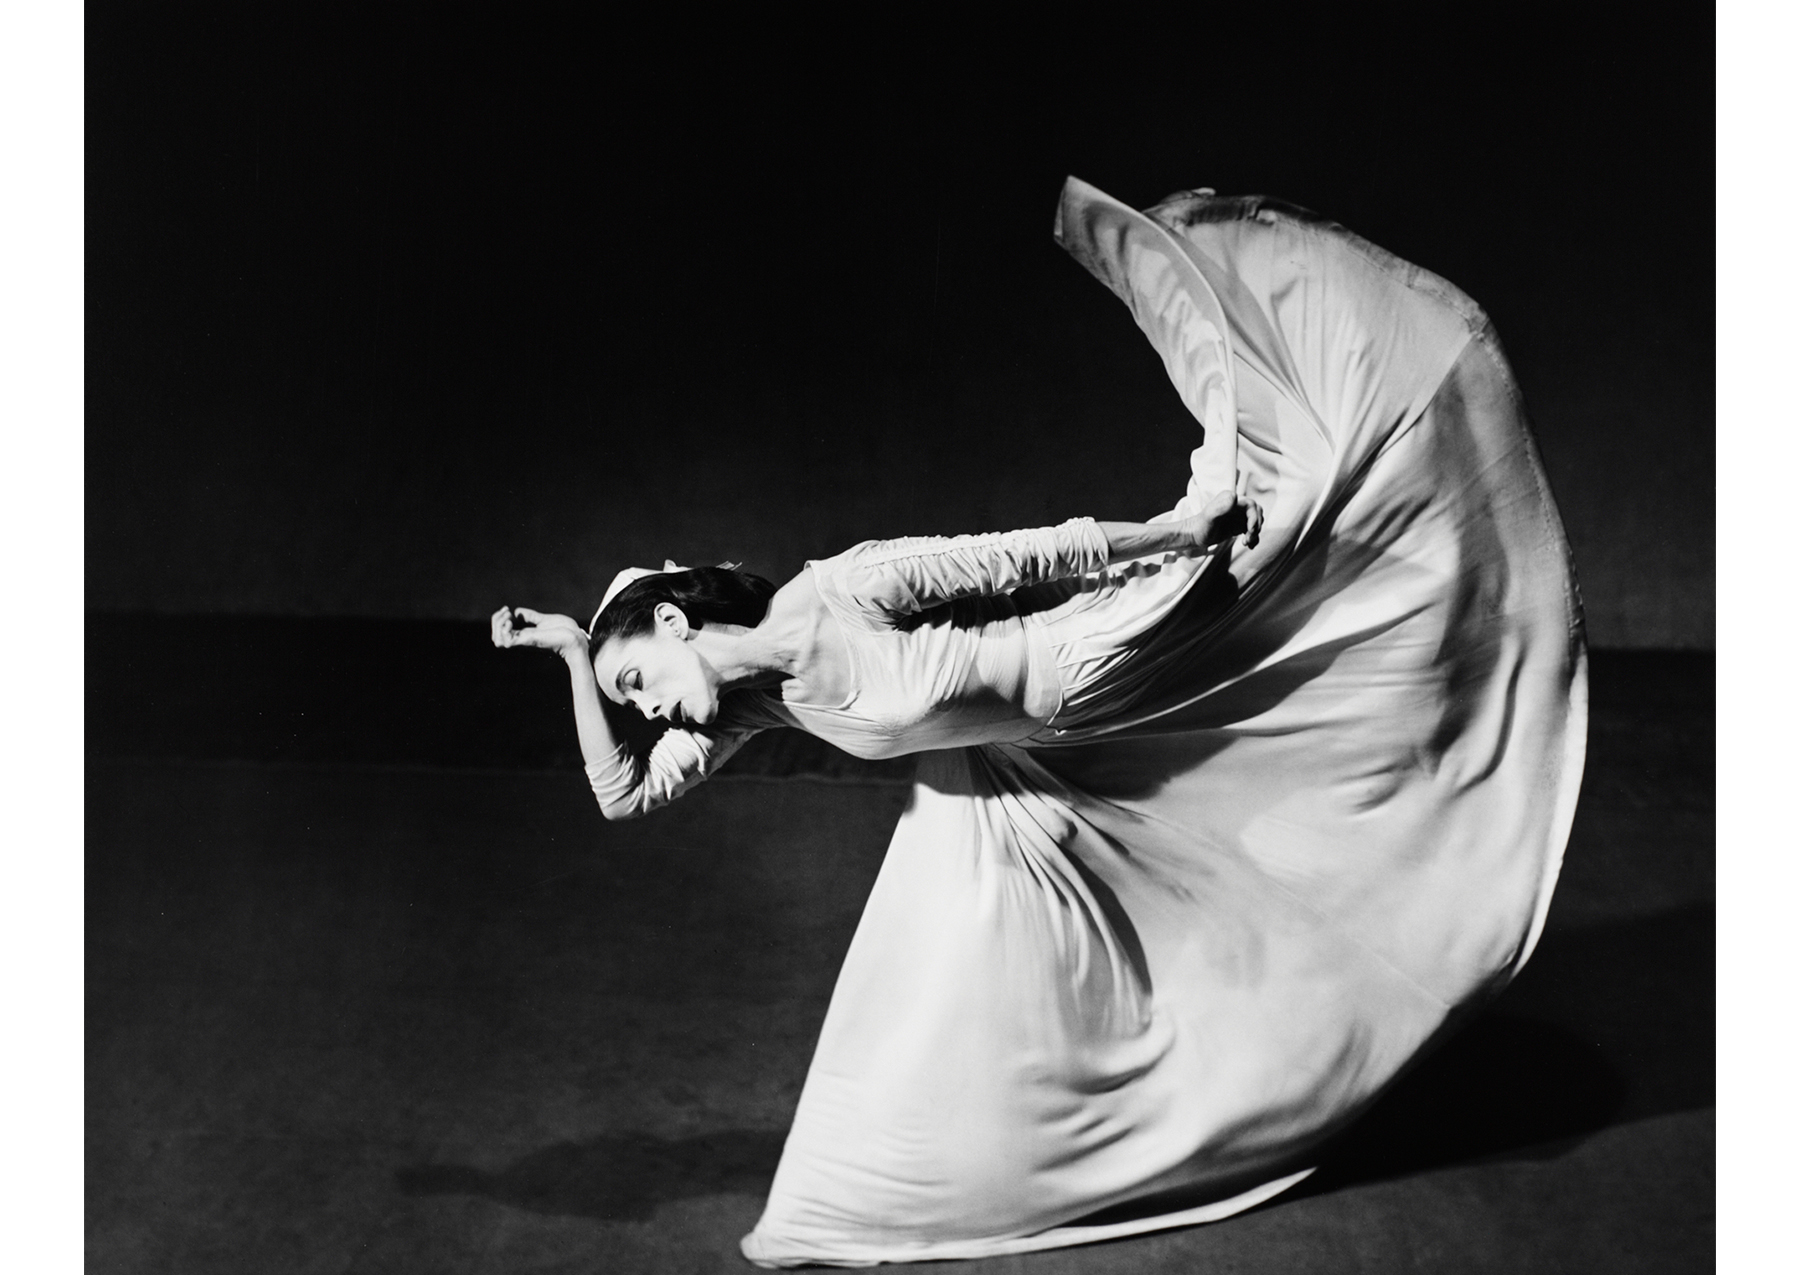 dancer in a full skirt, her body is parallel to the ground and ther left leg is lifted behind her